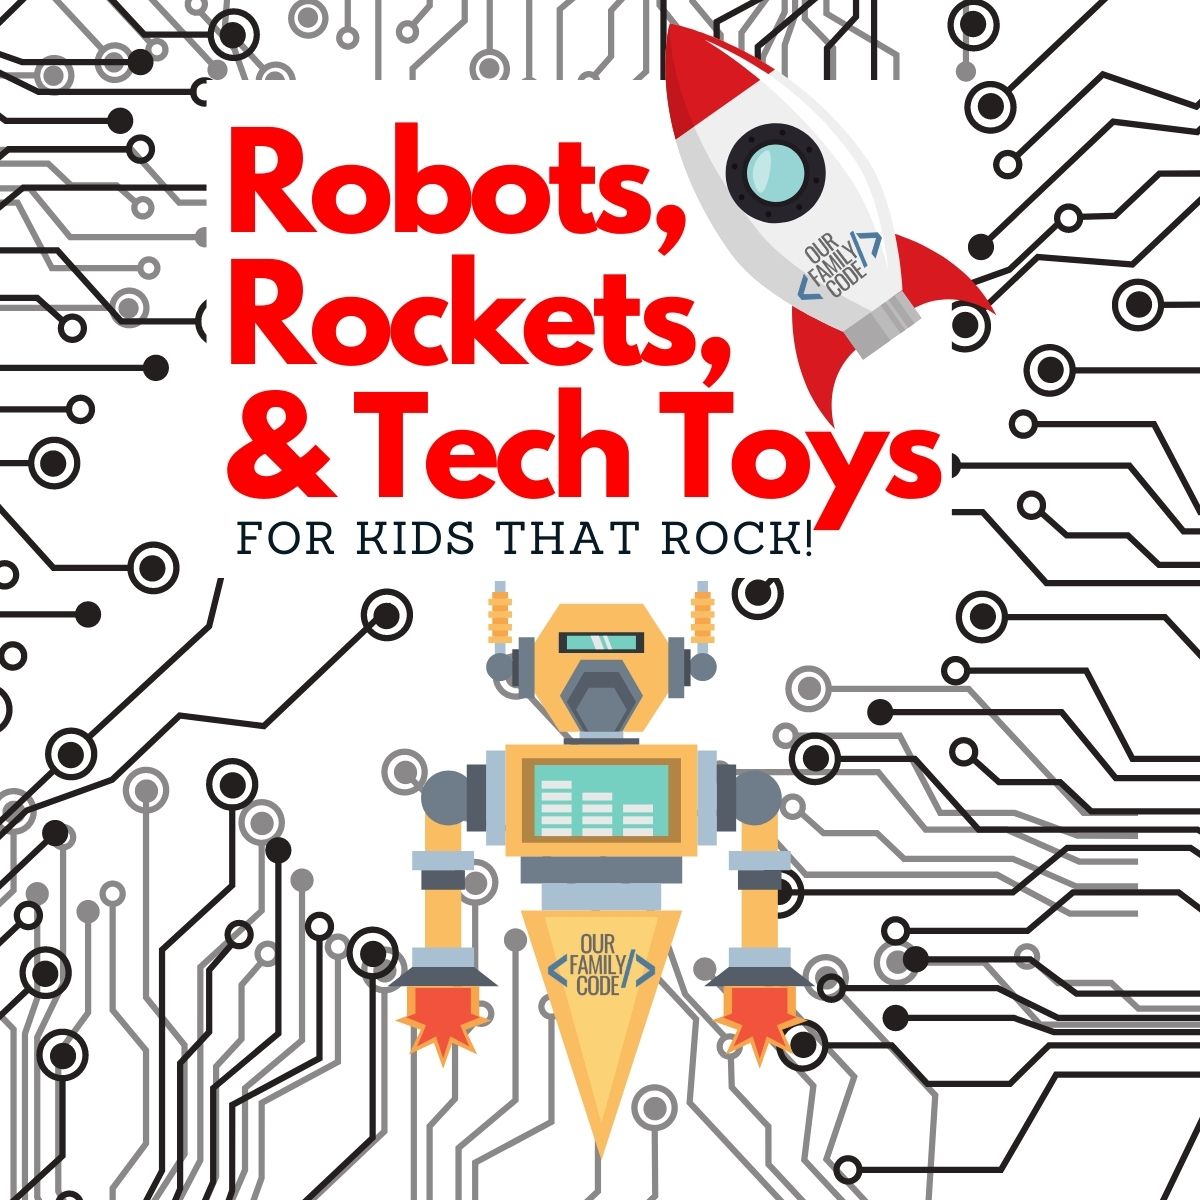 Find the best robots that teach kids coding and engineering skills, rockets that explore physics, and the top-rated tech toys for kids on this STEAM gift guide for kids! #besttechtoys #techforkids #bestrobotsforkids #teachkidstocode #techgifts #STEMgifts